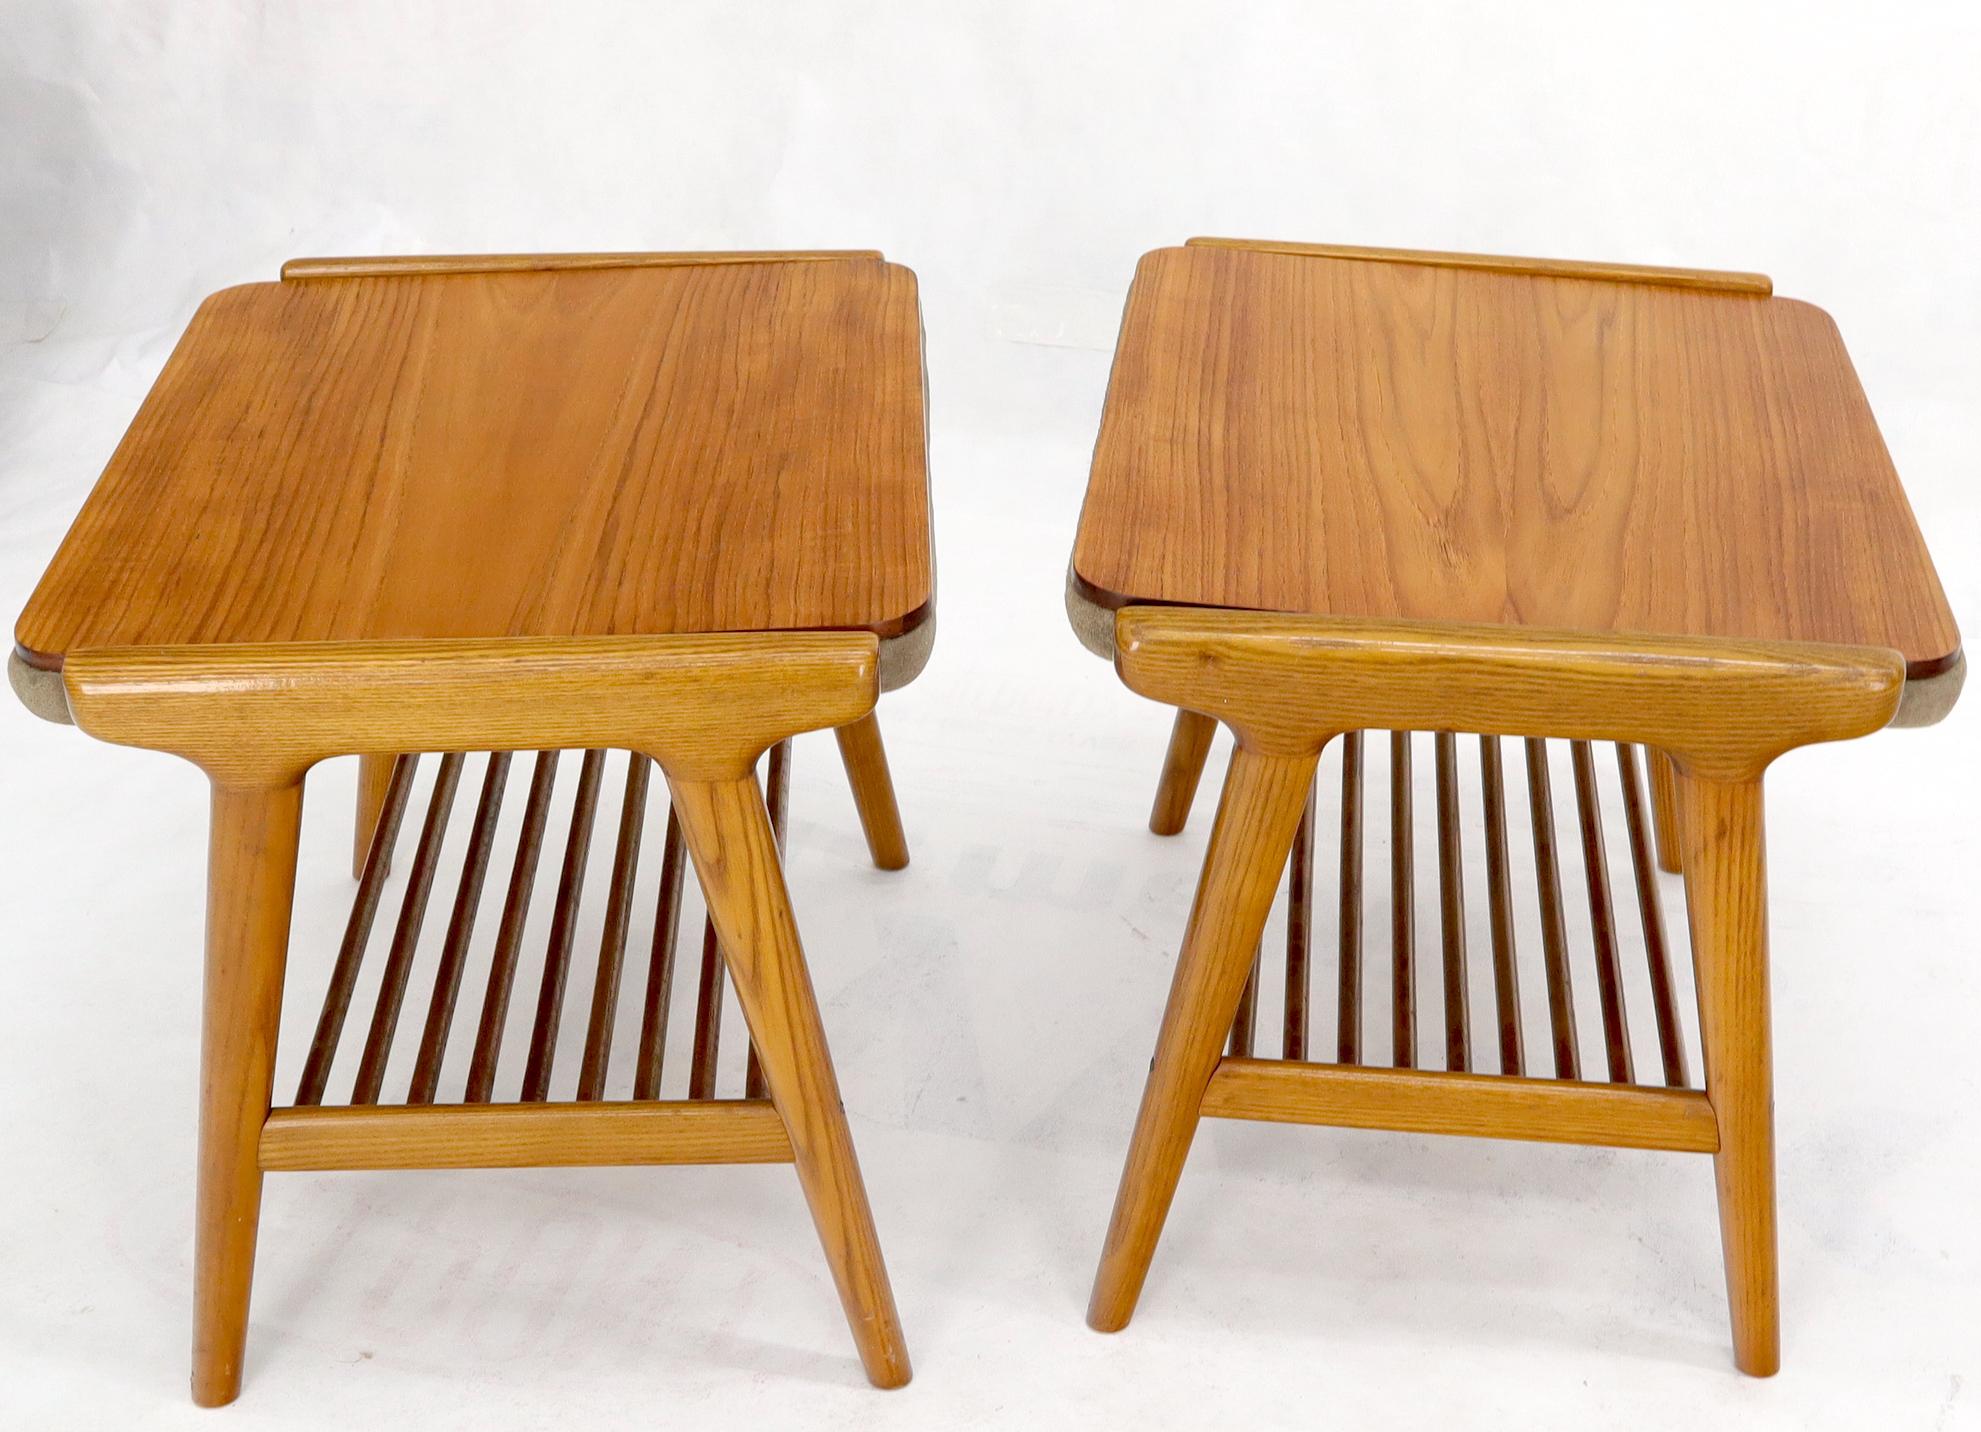 Pair of Danish Mid-Century Modern teak tops side tables flipping to suede upholstery benches.